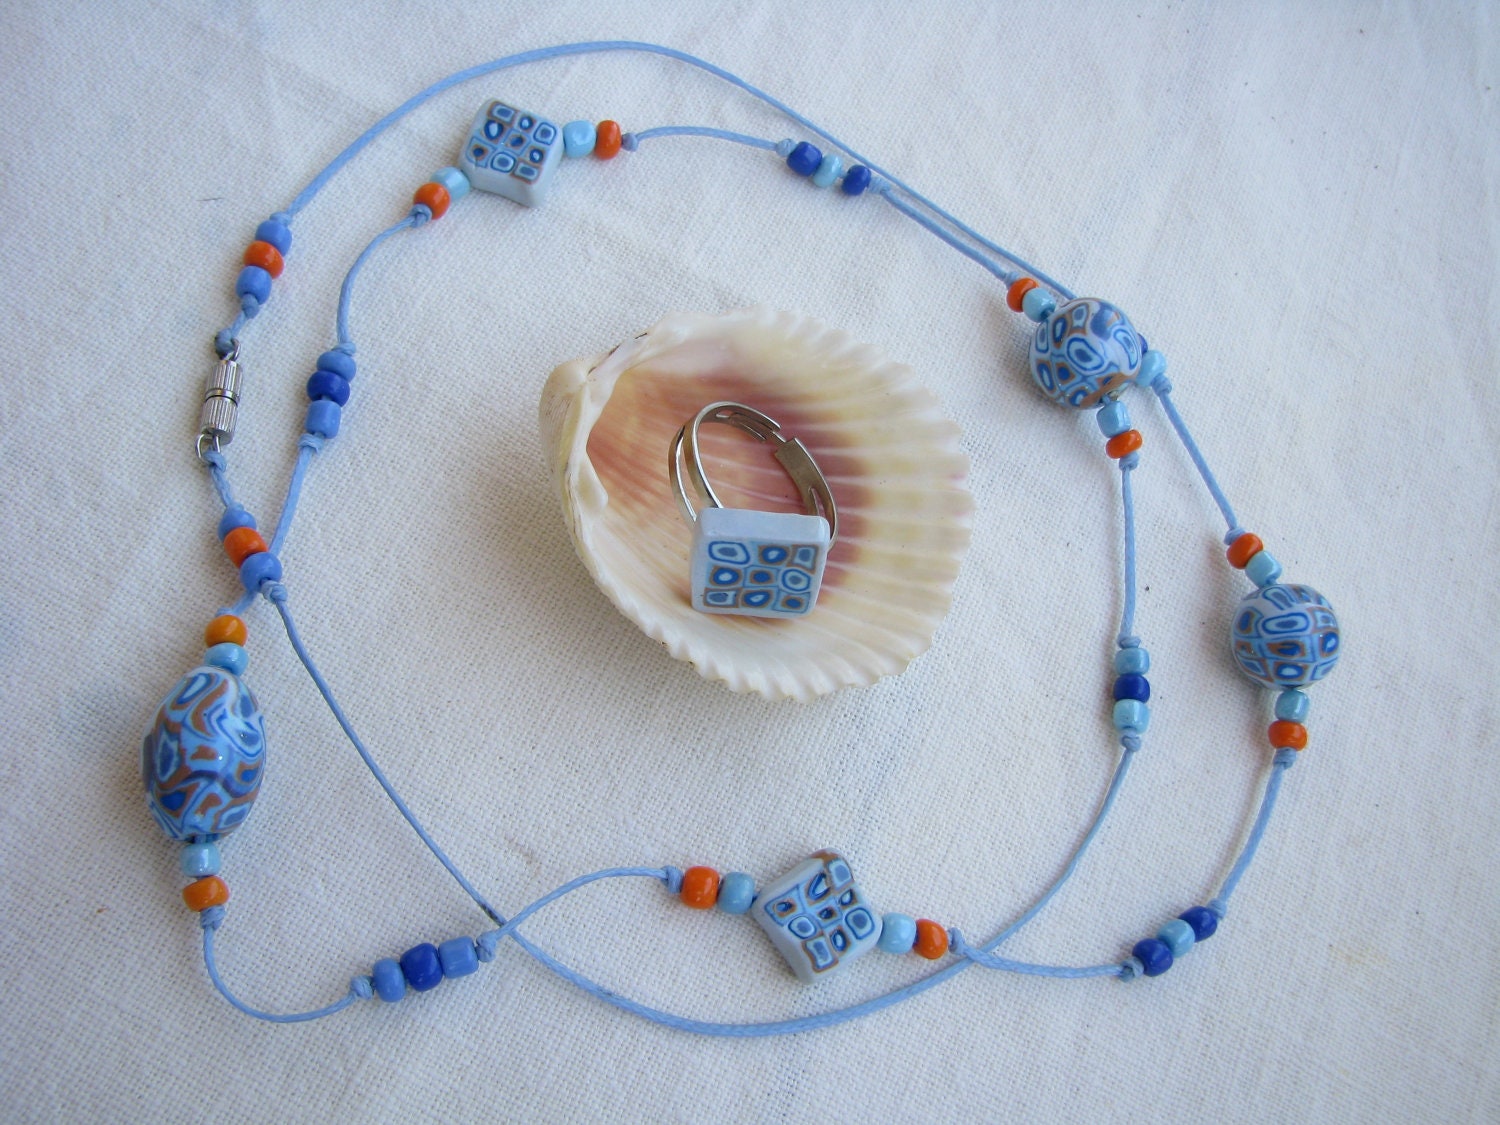 Necklace and ring, retro hippie in pastel blue, dark blue, gray blue and light brown - ocher